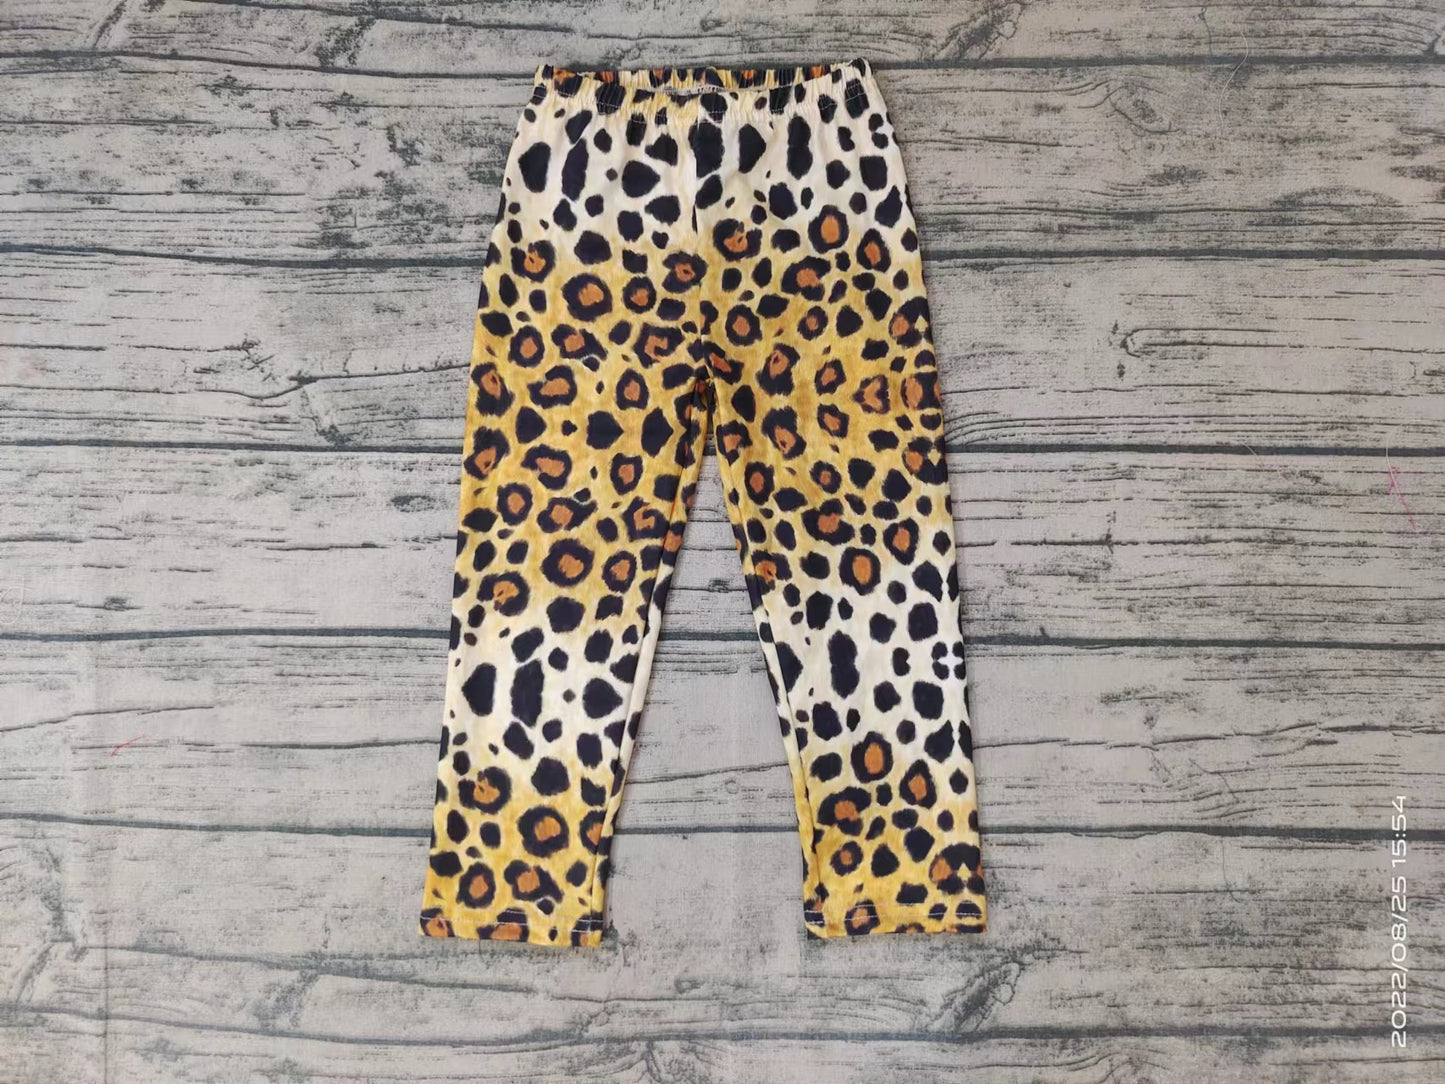 Baby Girls brown leopard colorful legging pants